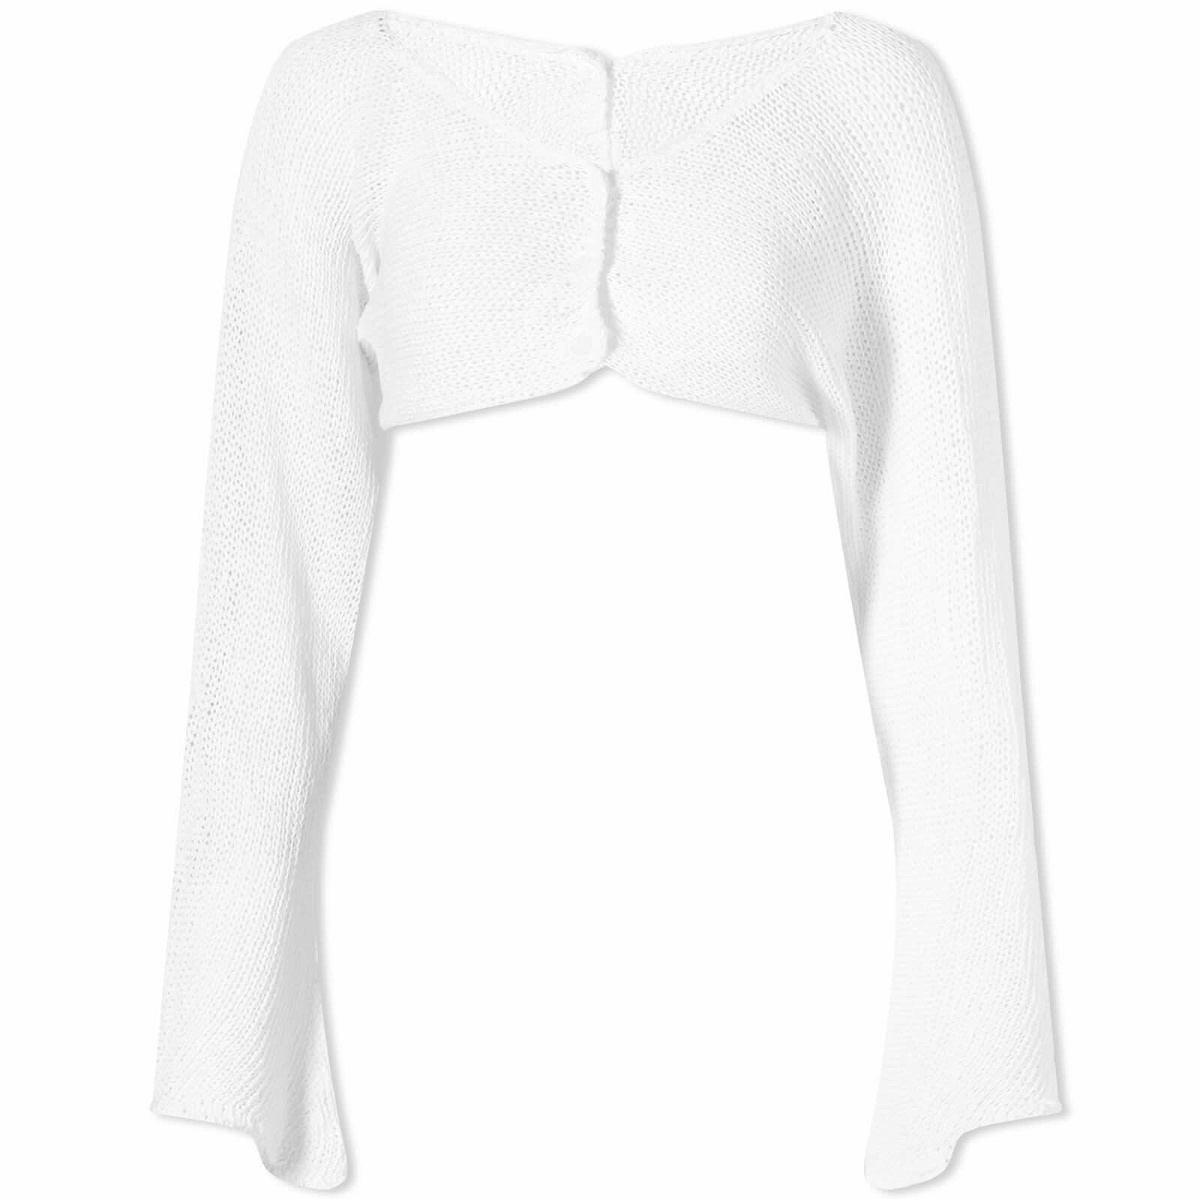 The Open Product Women's Cropped Bolero Cardigan in Ivory The Open